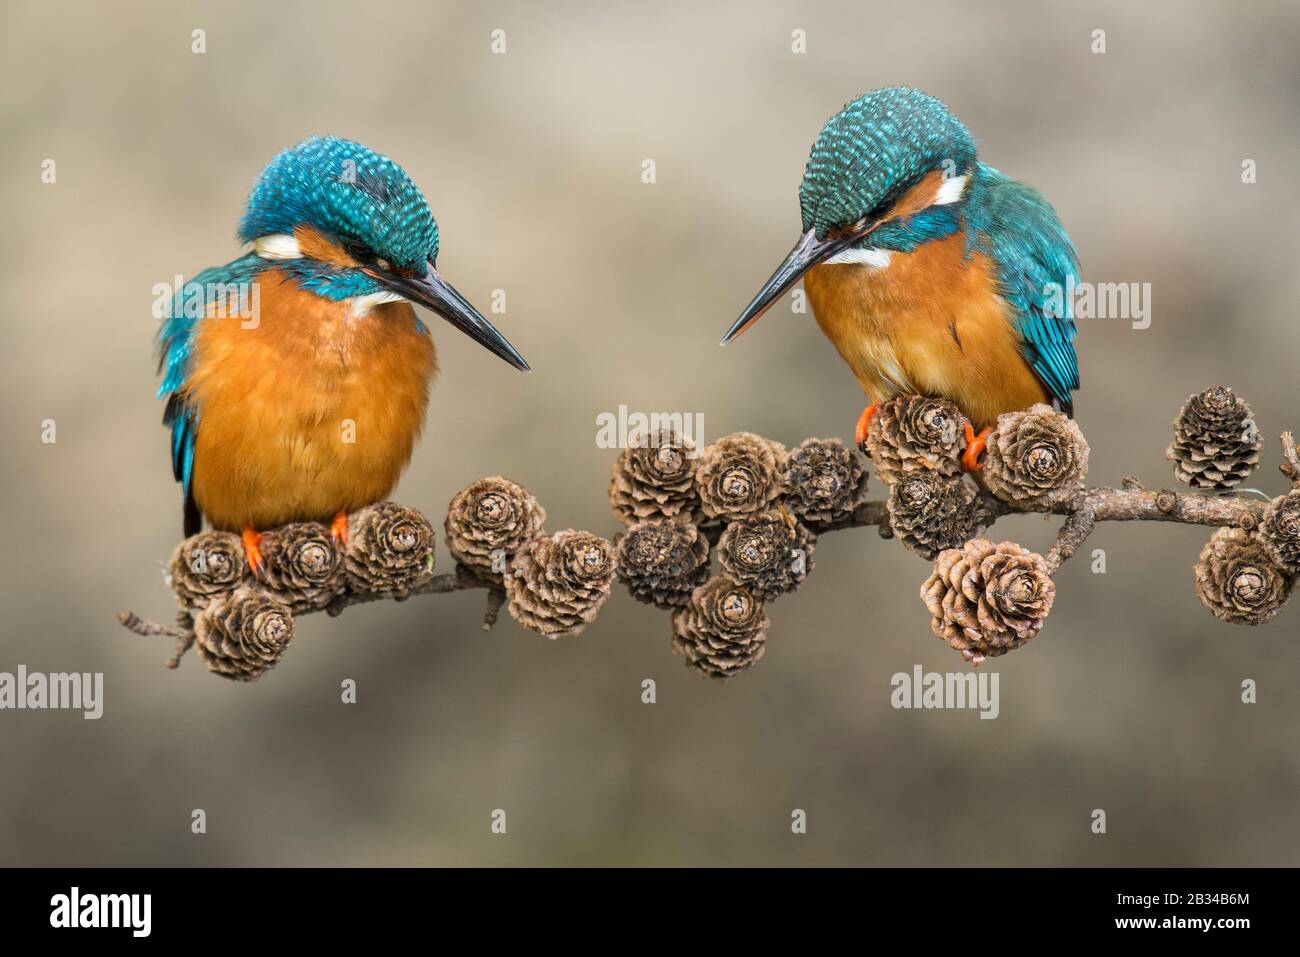 River kingfisher (Alcedo atthis), couplage de paires, Pays-Bas, Naarden Banque D'Images